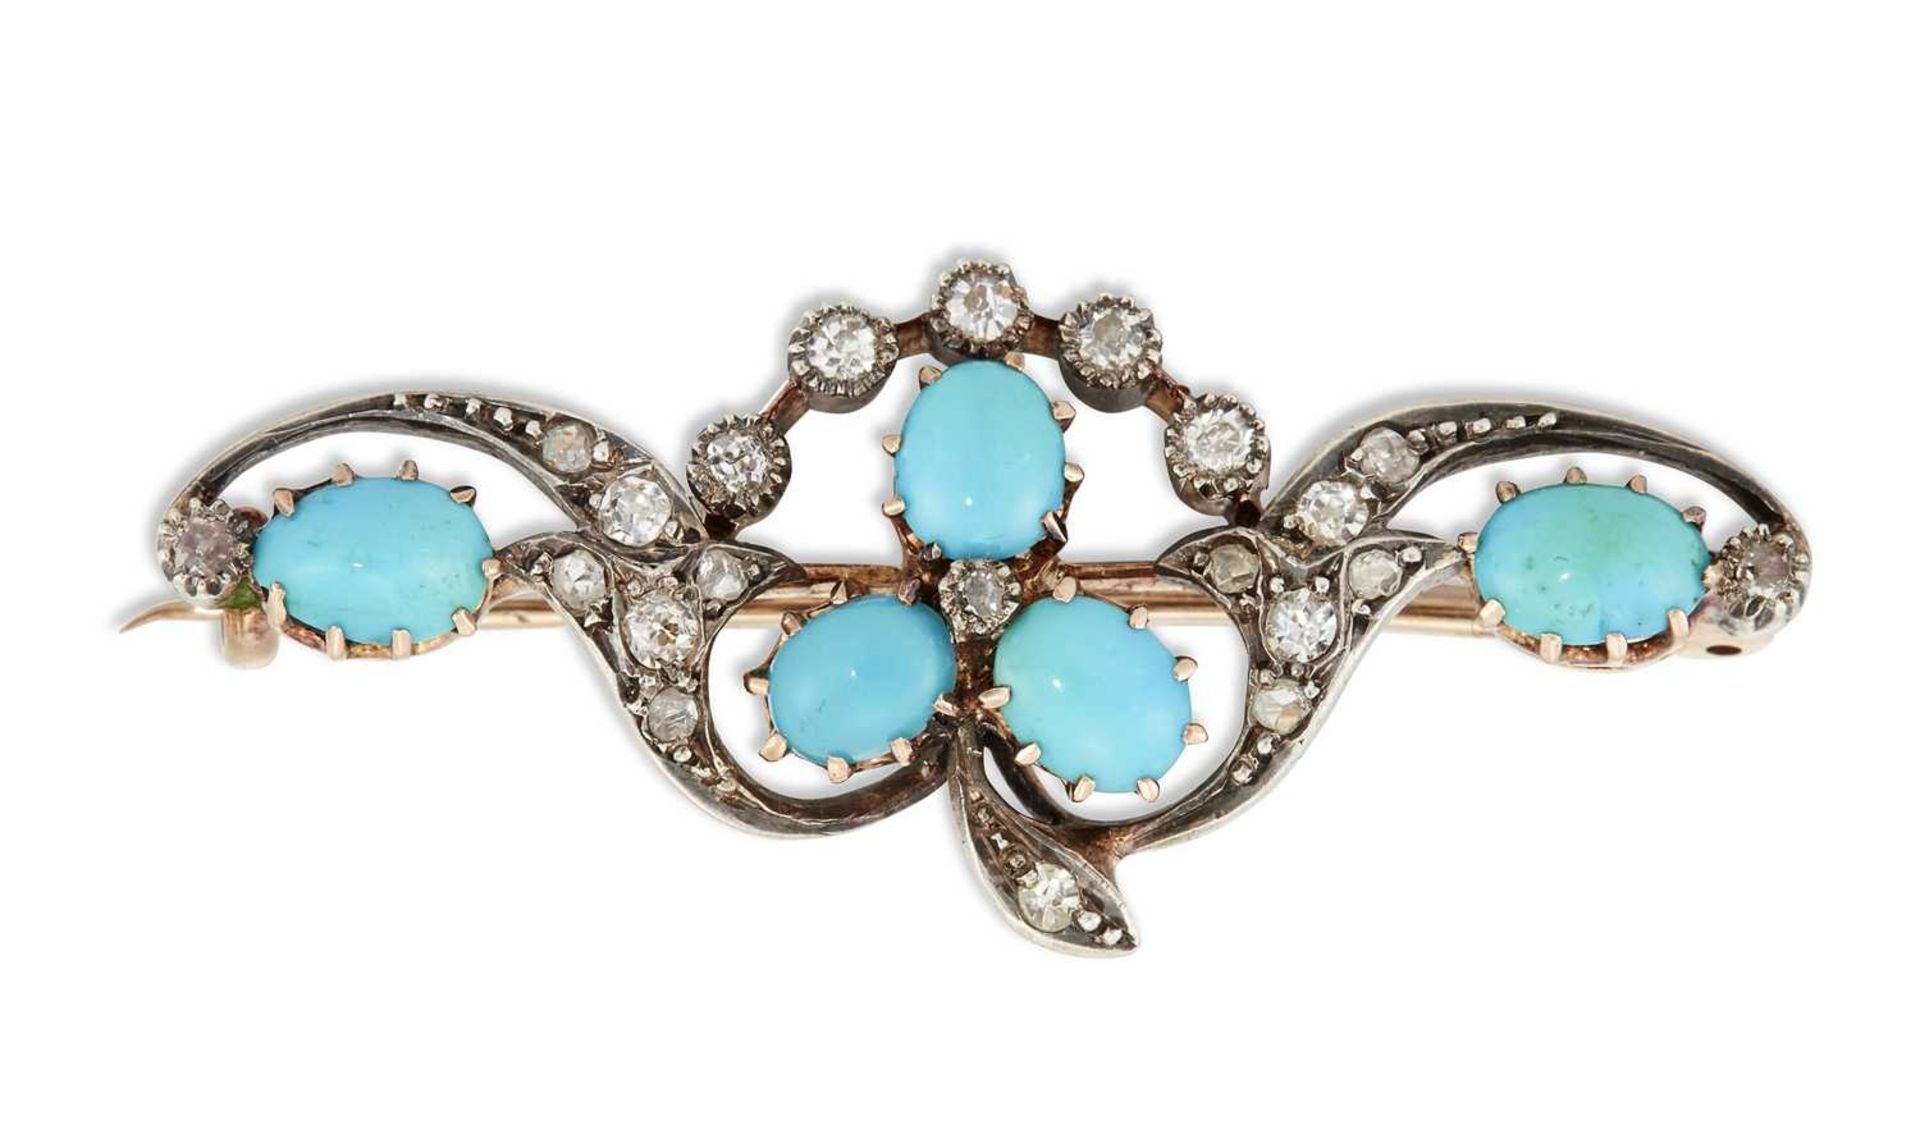 AN EARLY 20TH CENTURY TURQUOISE AND DIAMOND BROOCH